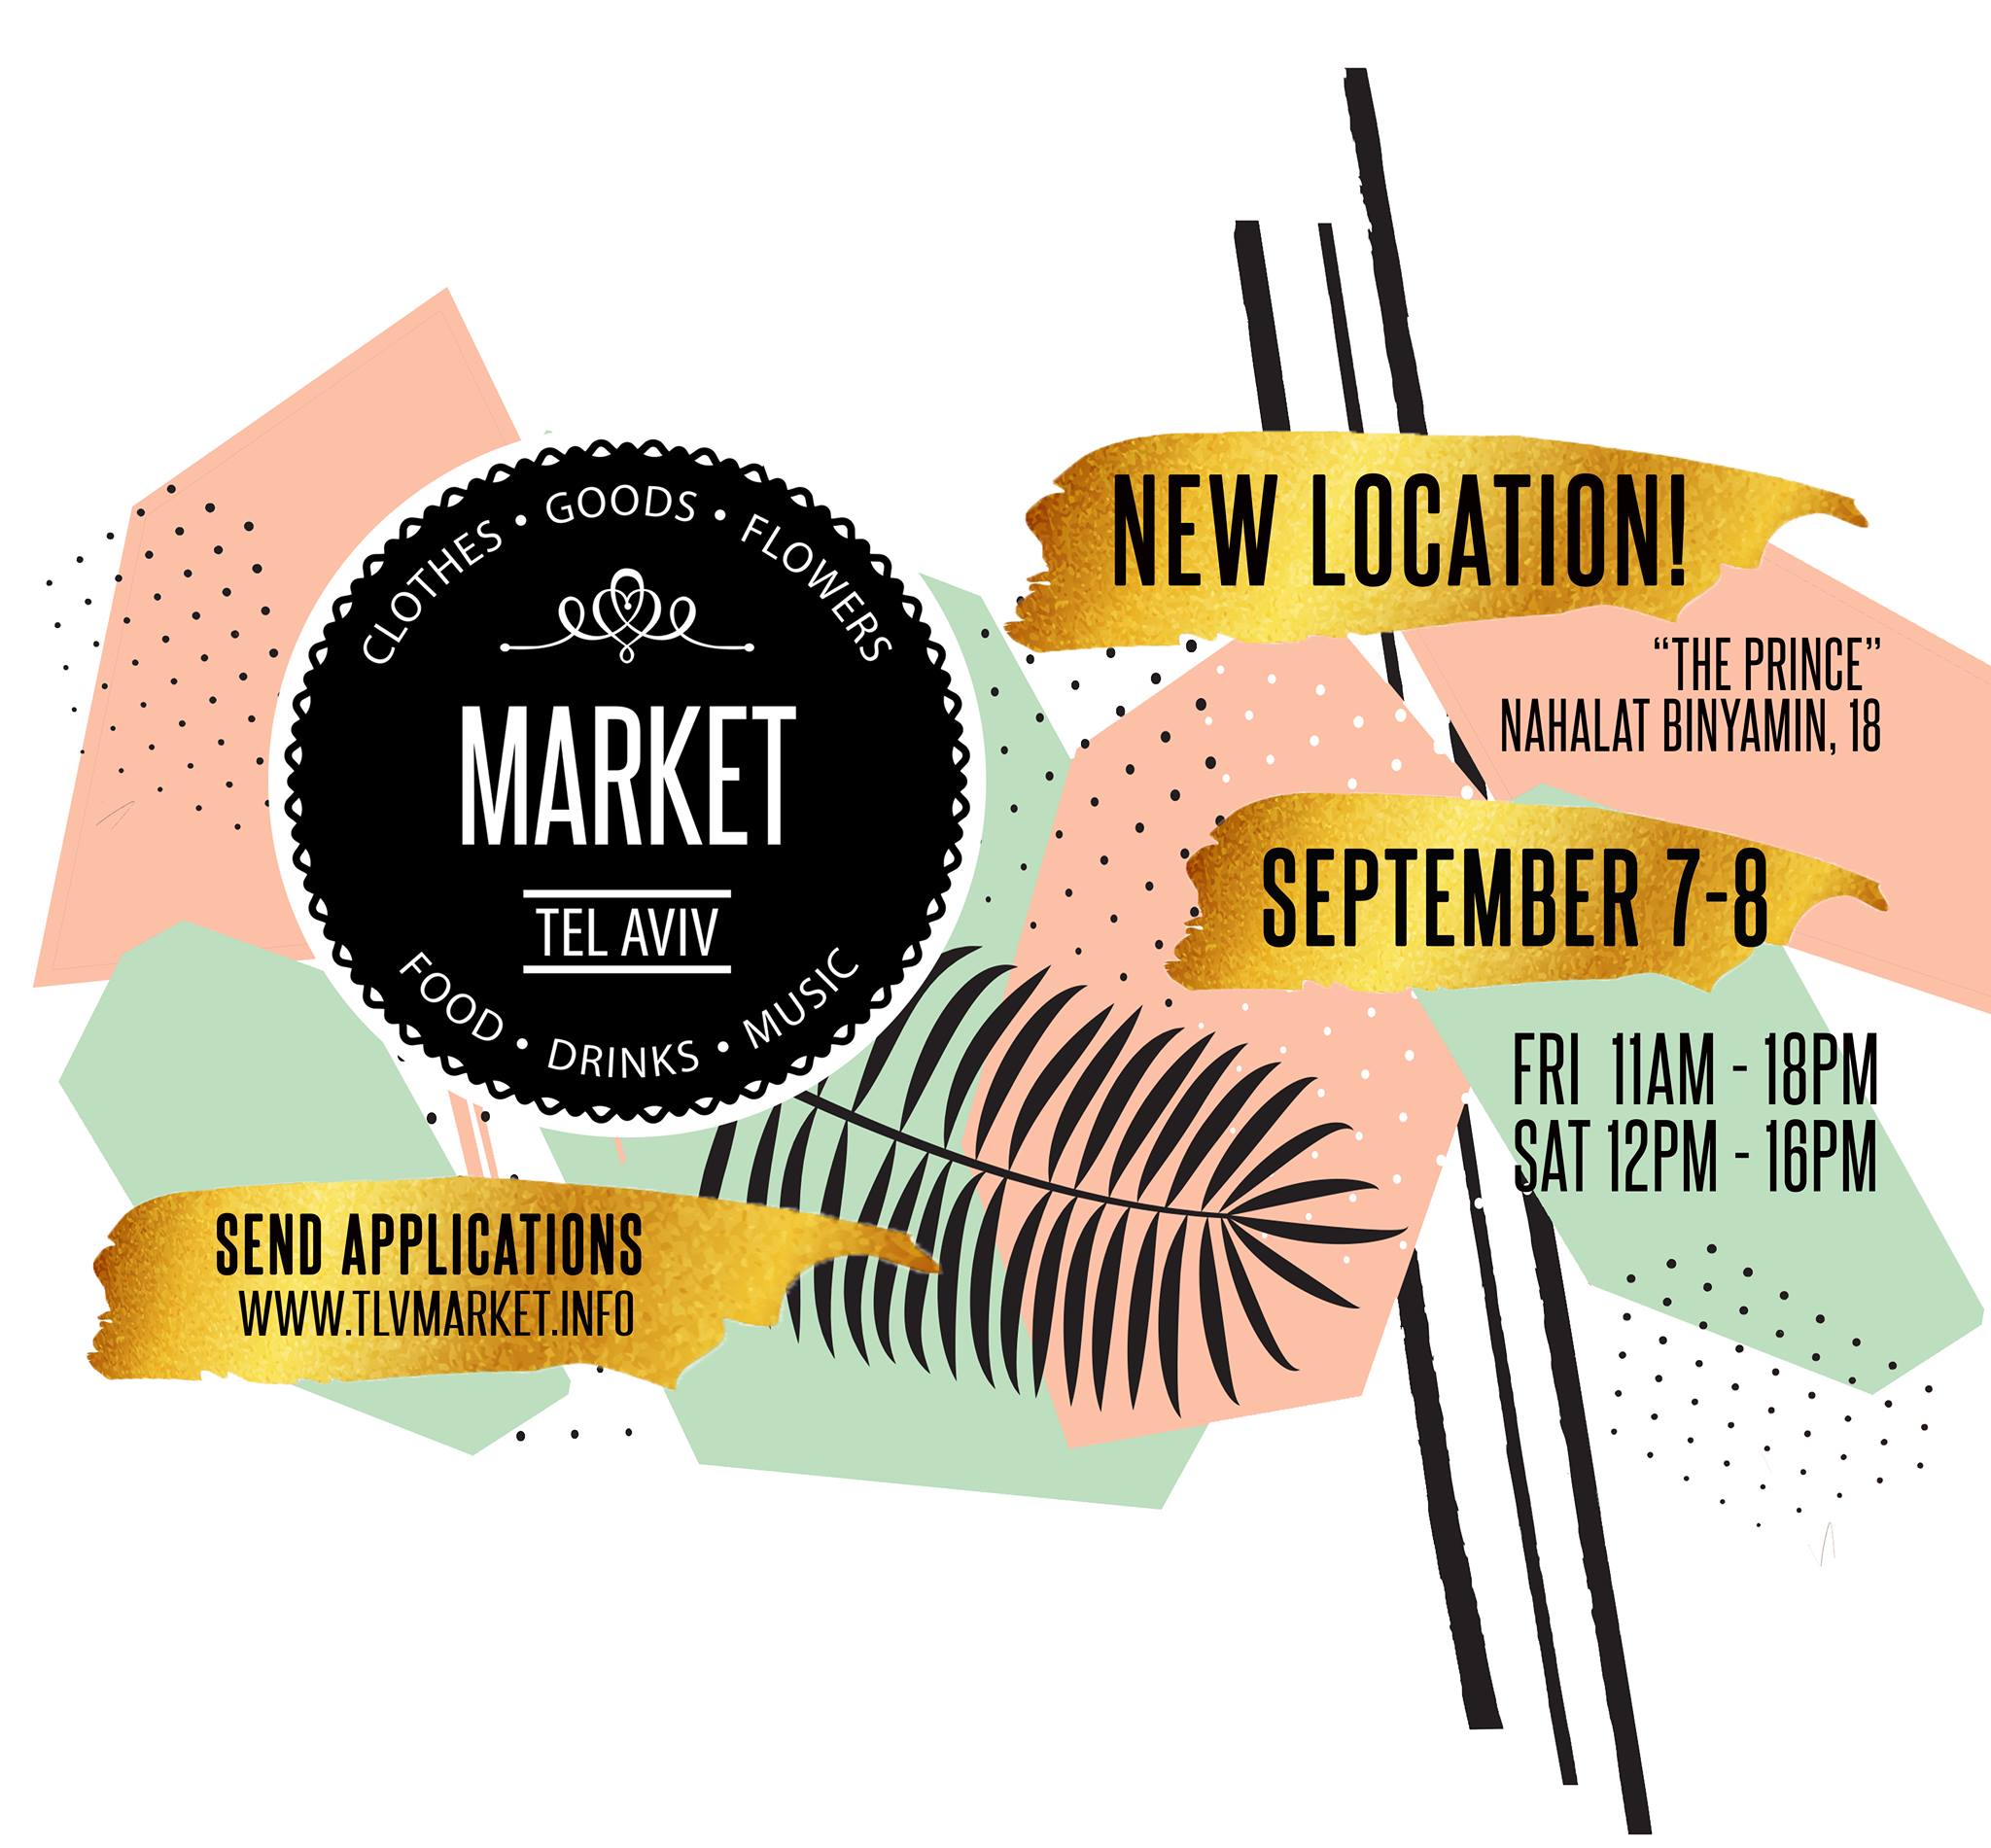 Fall Market.tlv // September 7-8 at "The Prince"